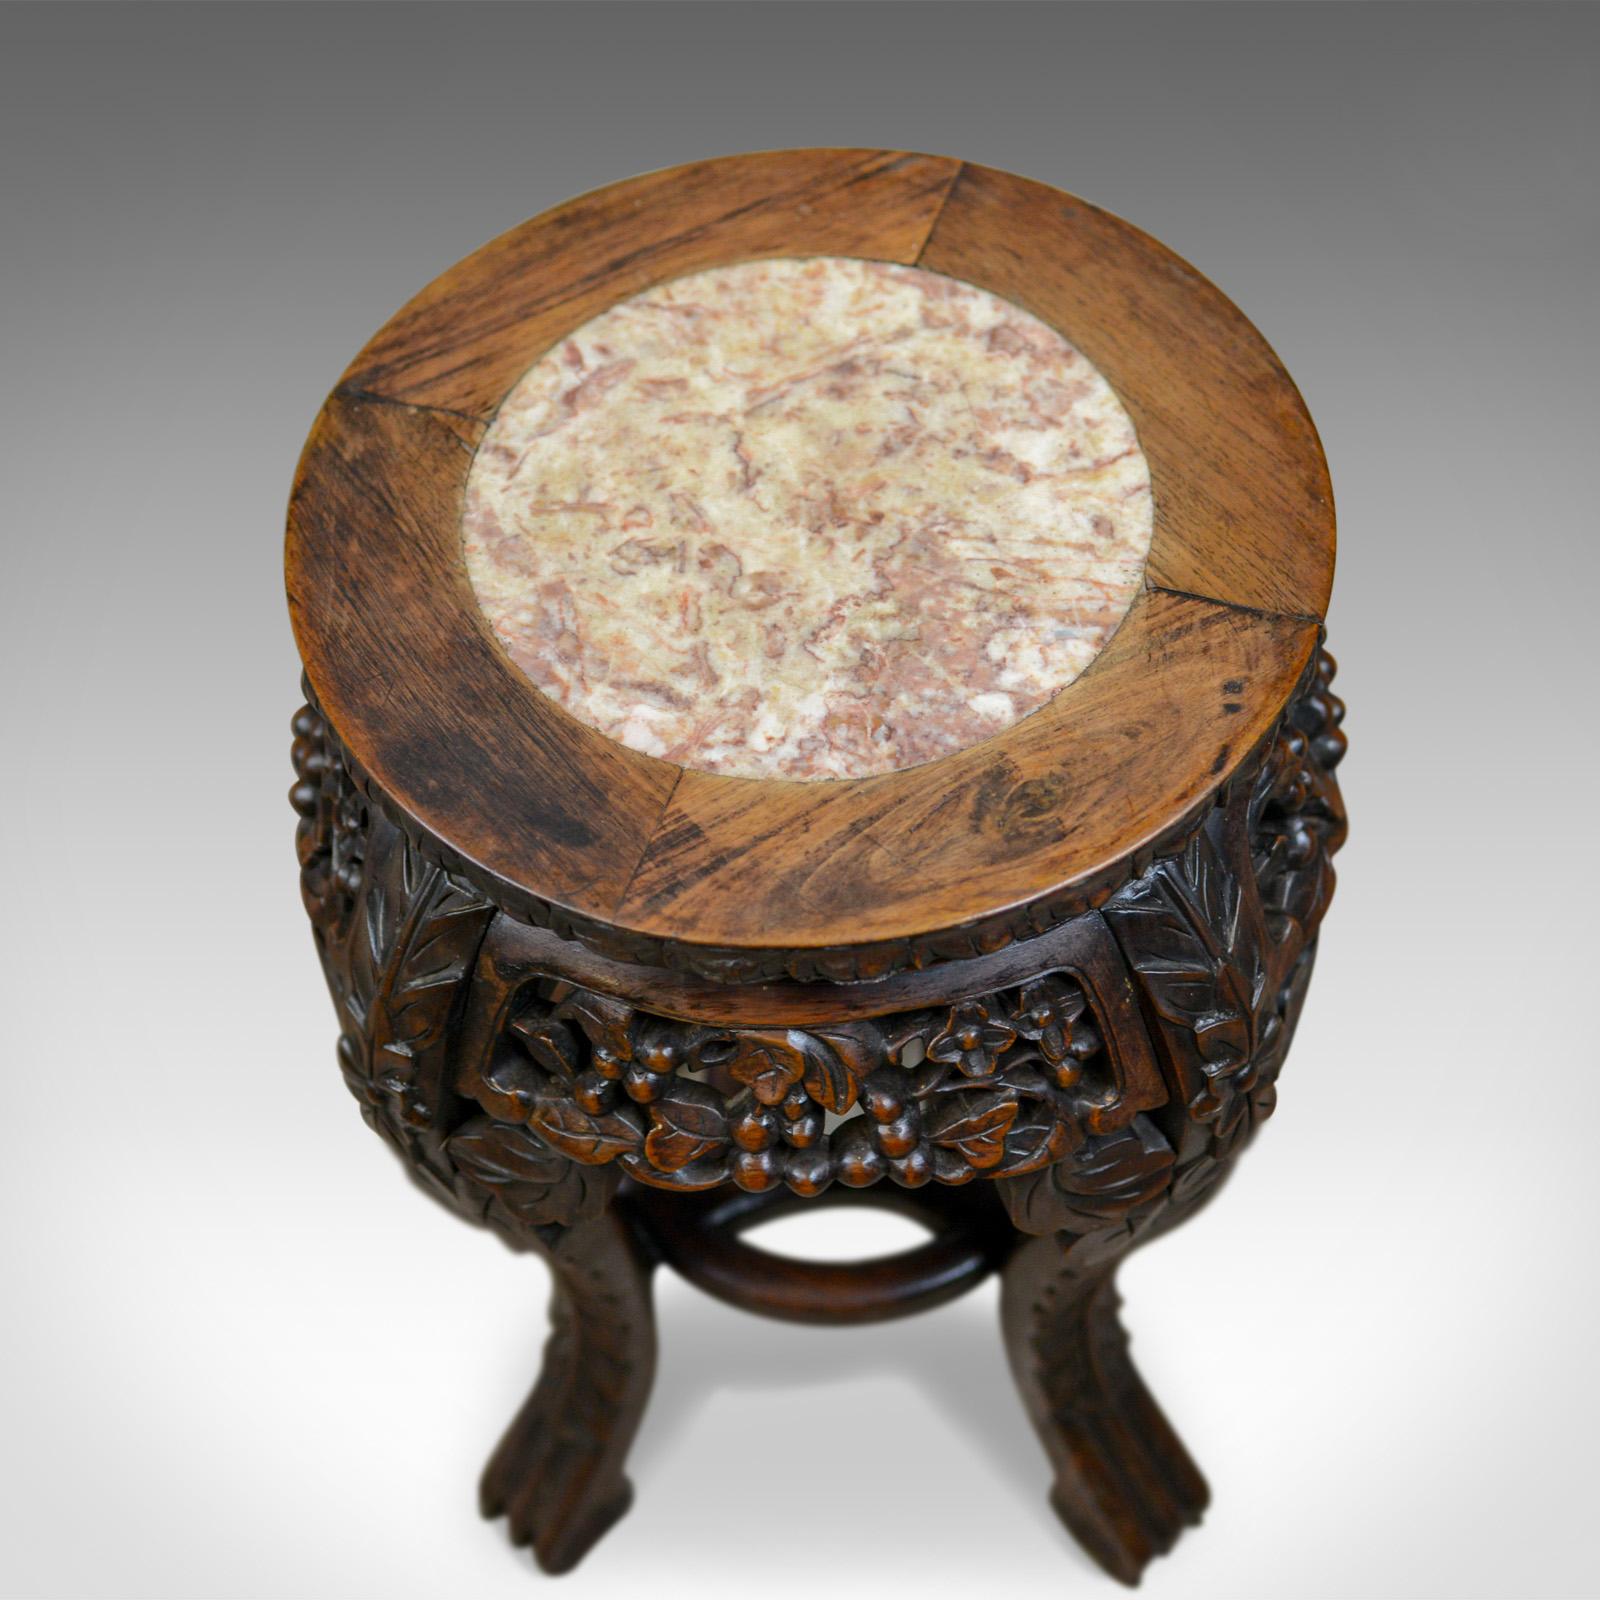 Chinese Export Antique Side Table, Carved, Chinese, Stand, Teak, Marble, circa 1900